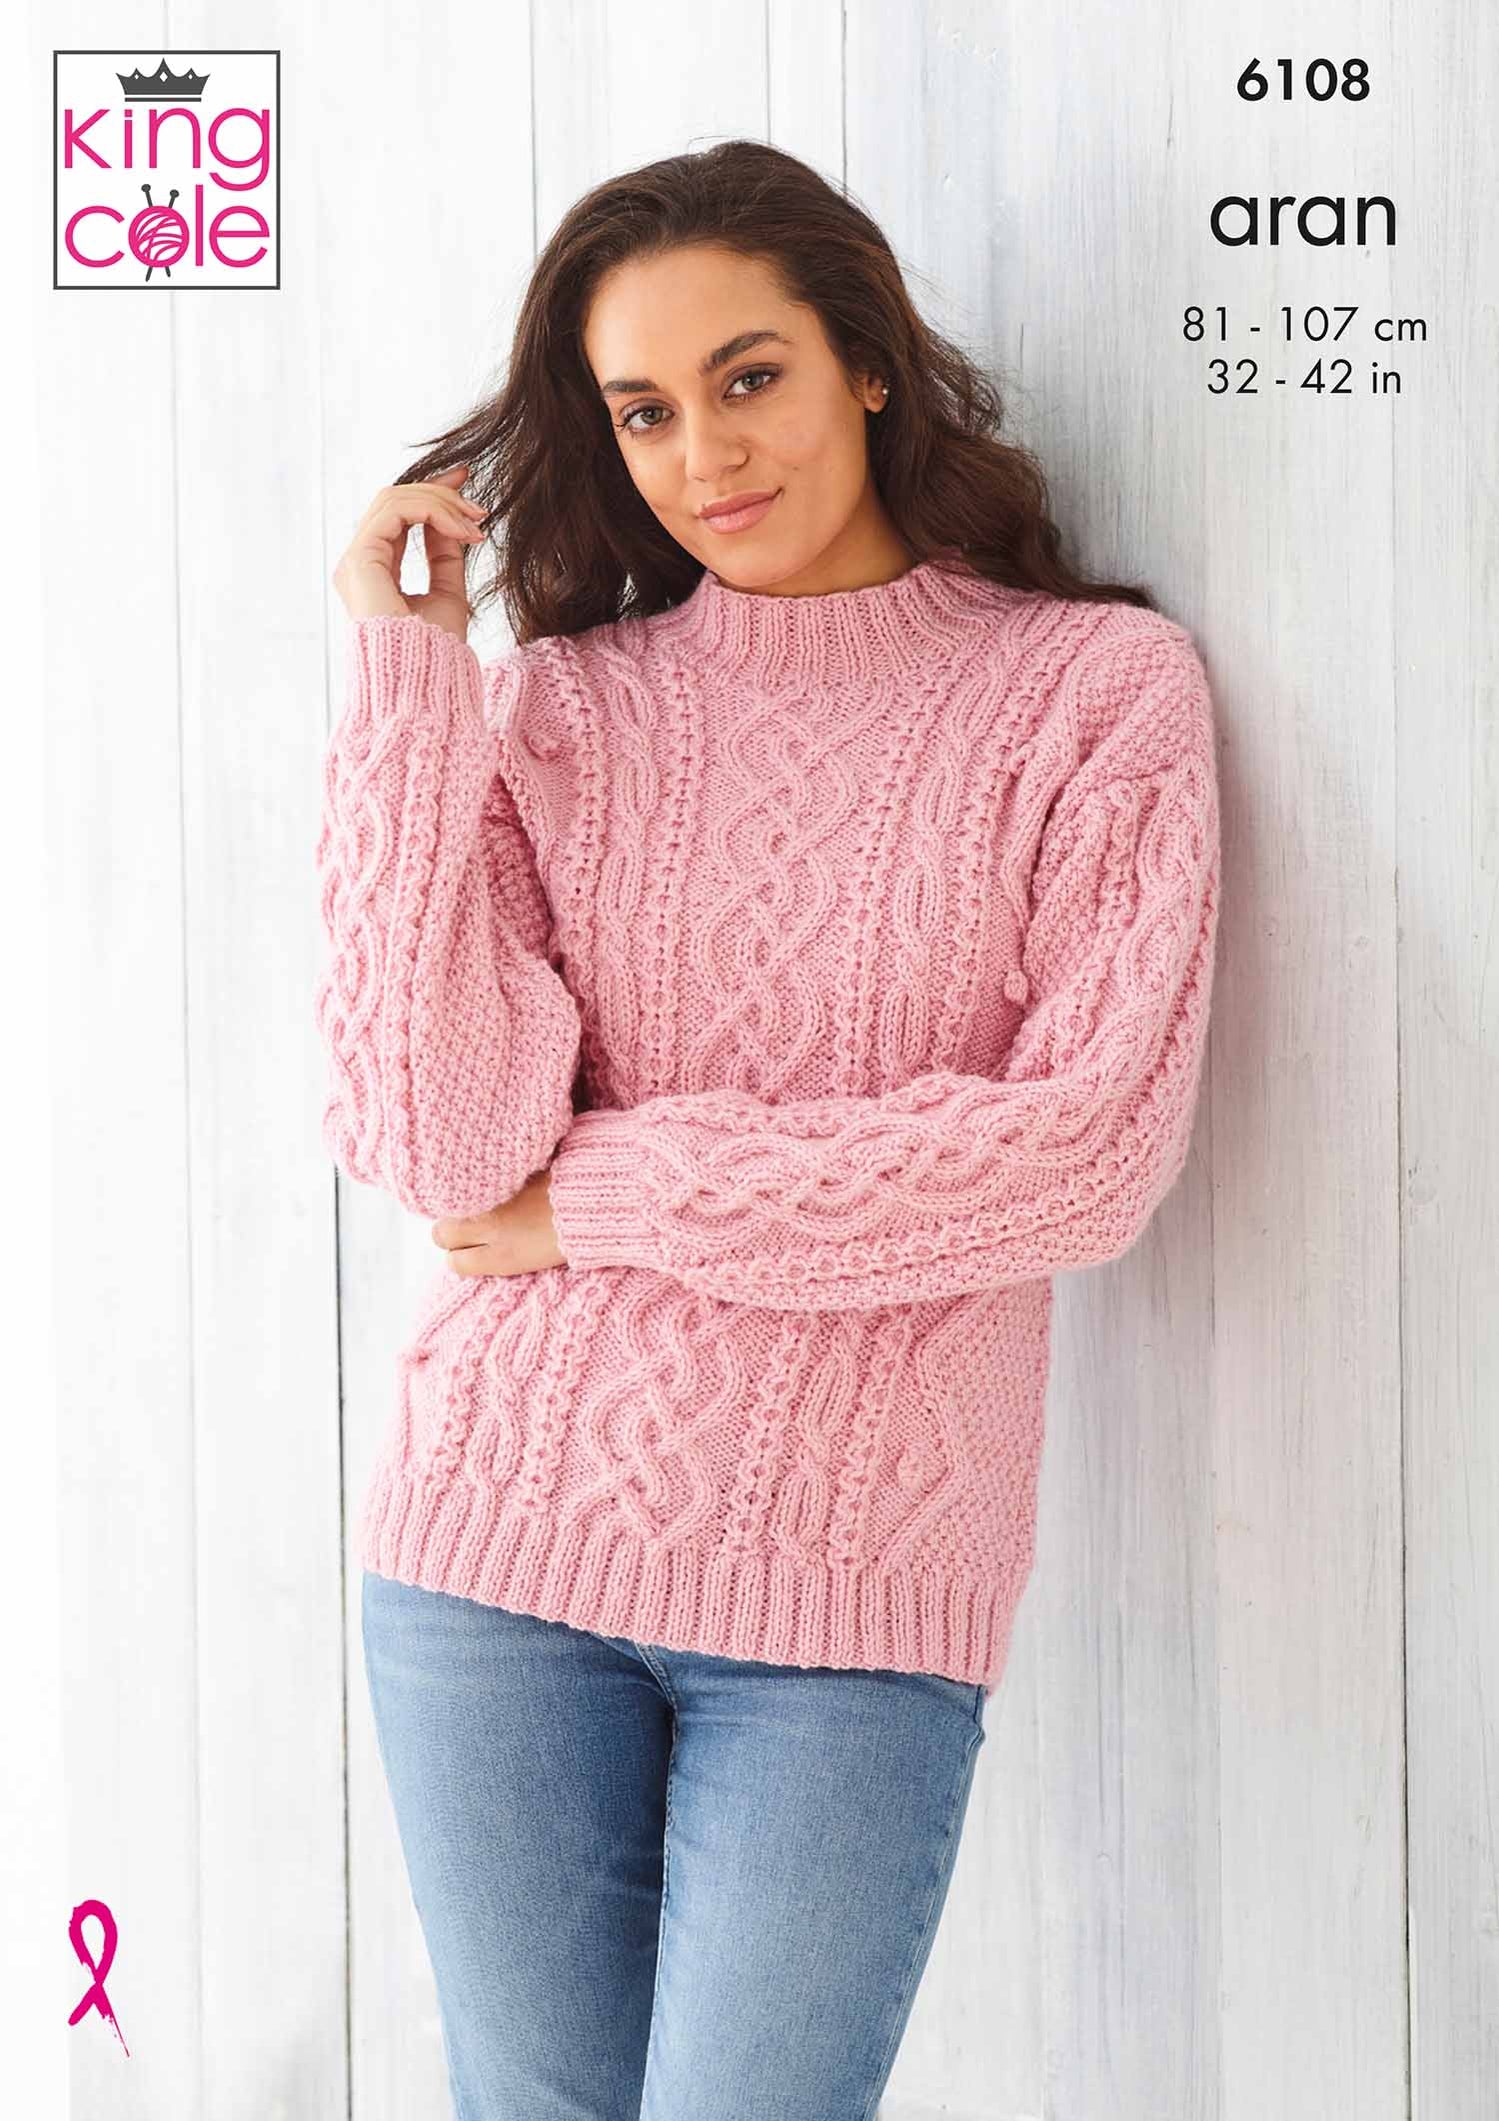 King Cole 6108 Aran Knitting Pattern for Ladies - Sweater and Cardigan ...